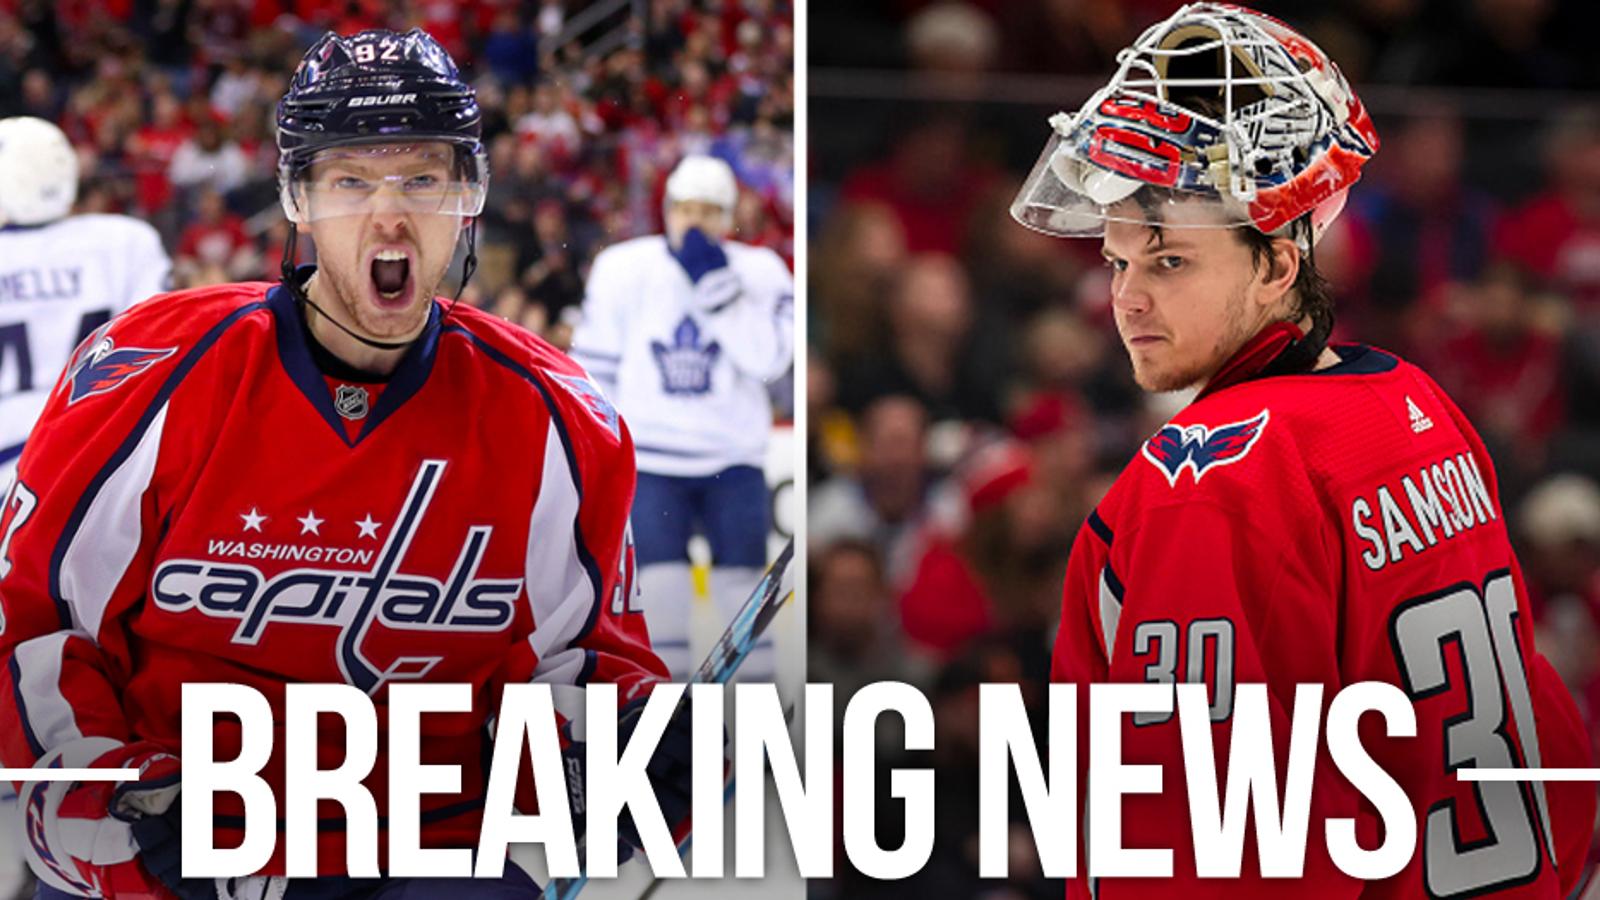 Kuznetsov and Samsonov pulled from Capitals lineup for “disciplinary reasons”